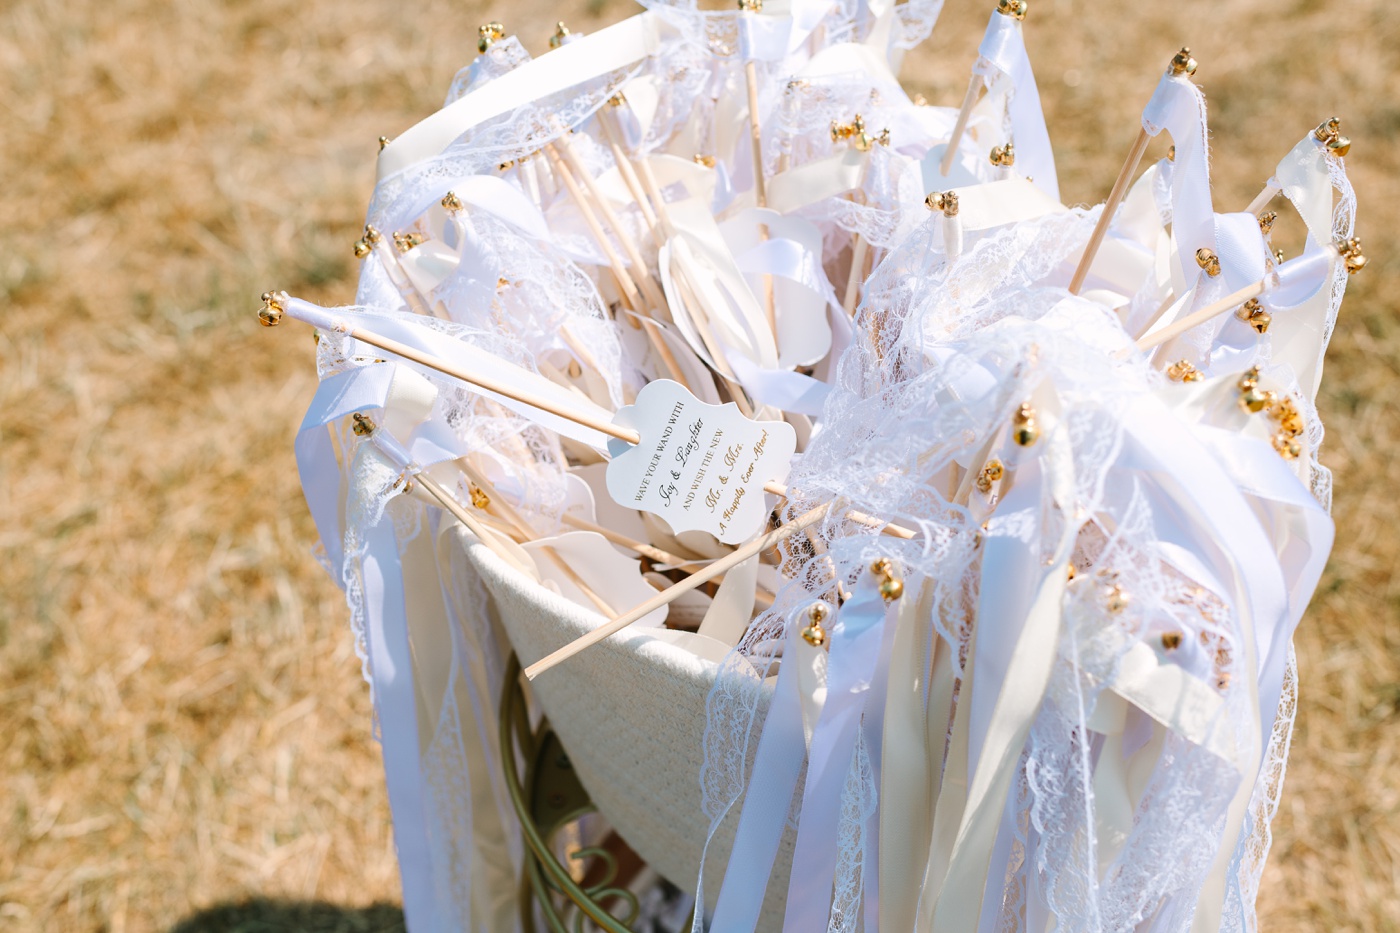 Basket with ribbon wands at a wedding ceremony